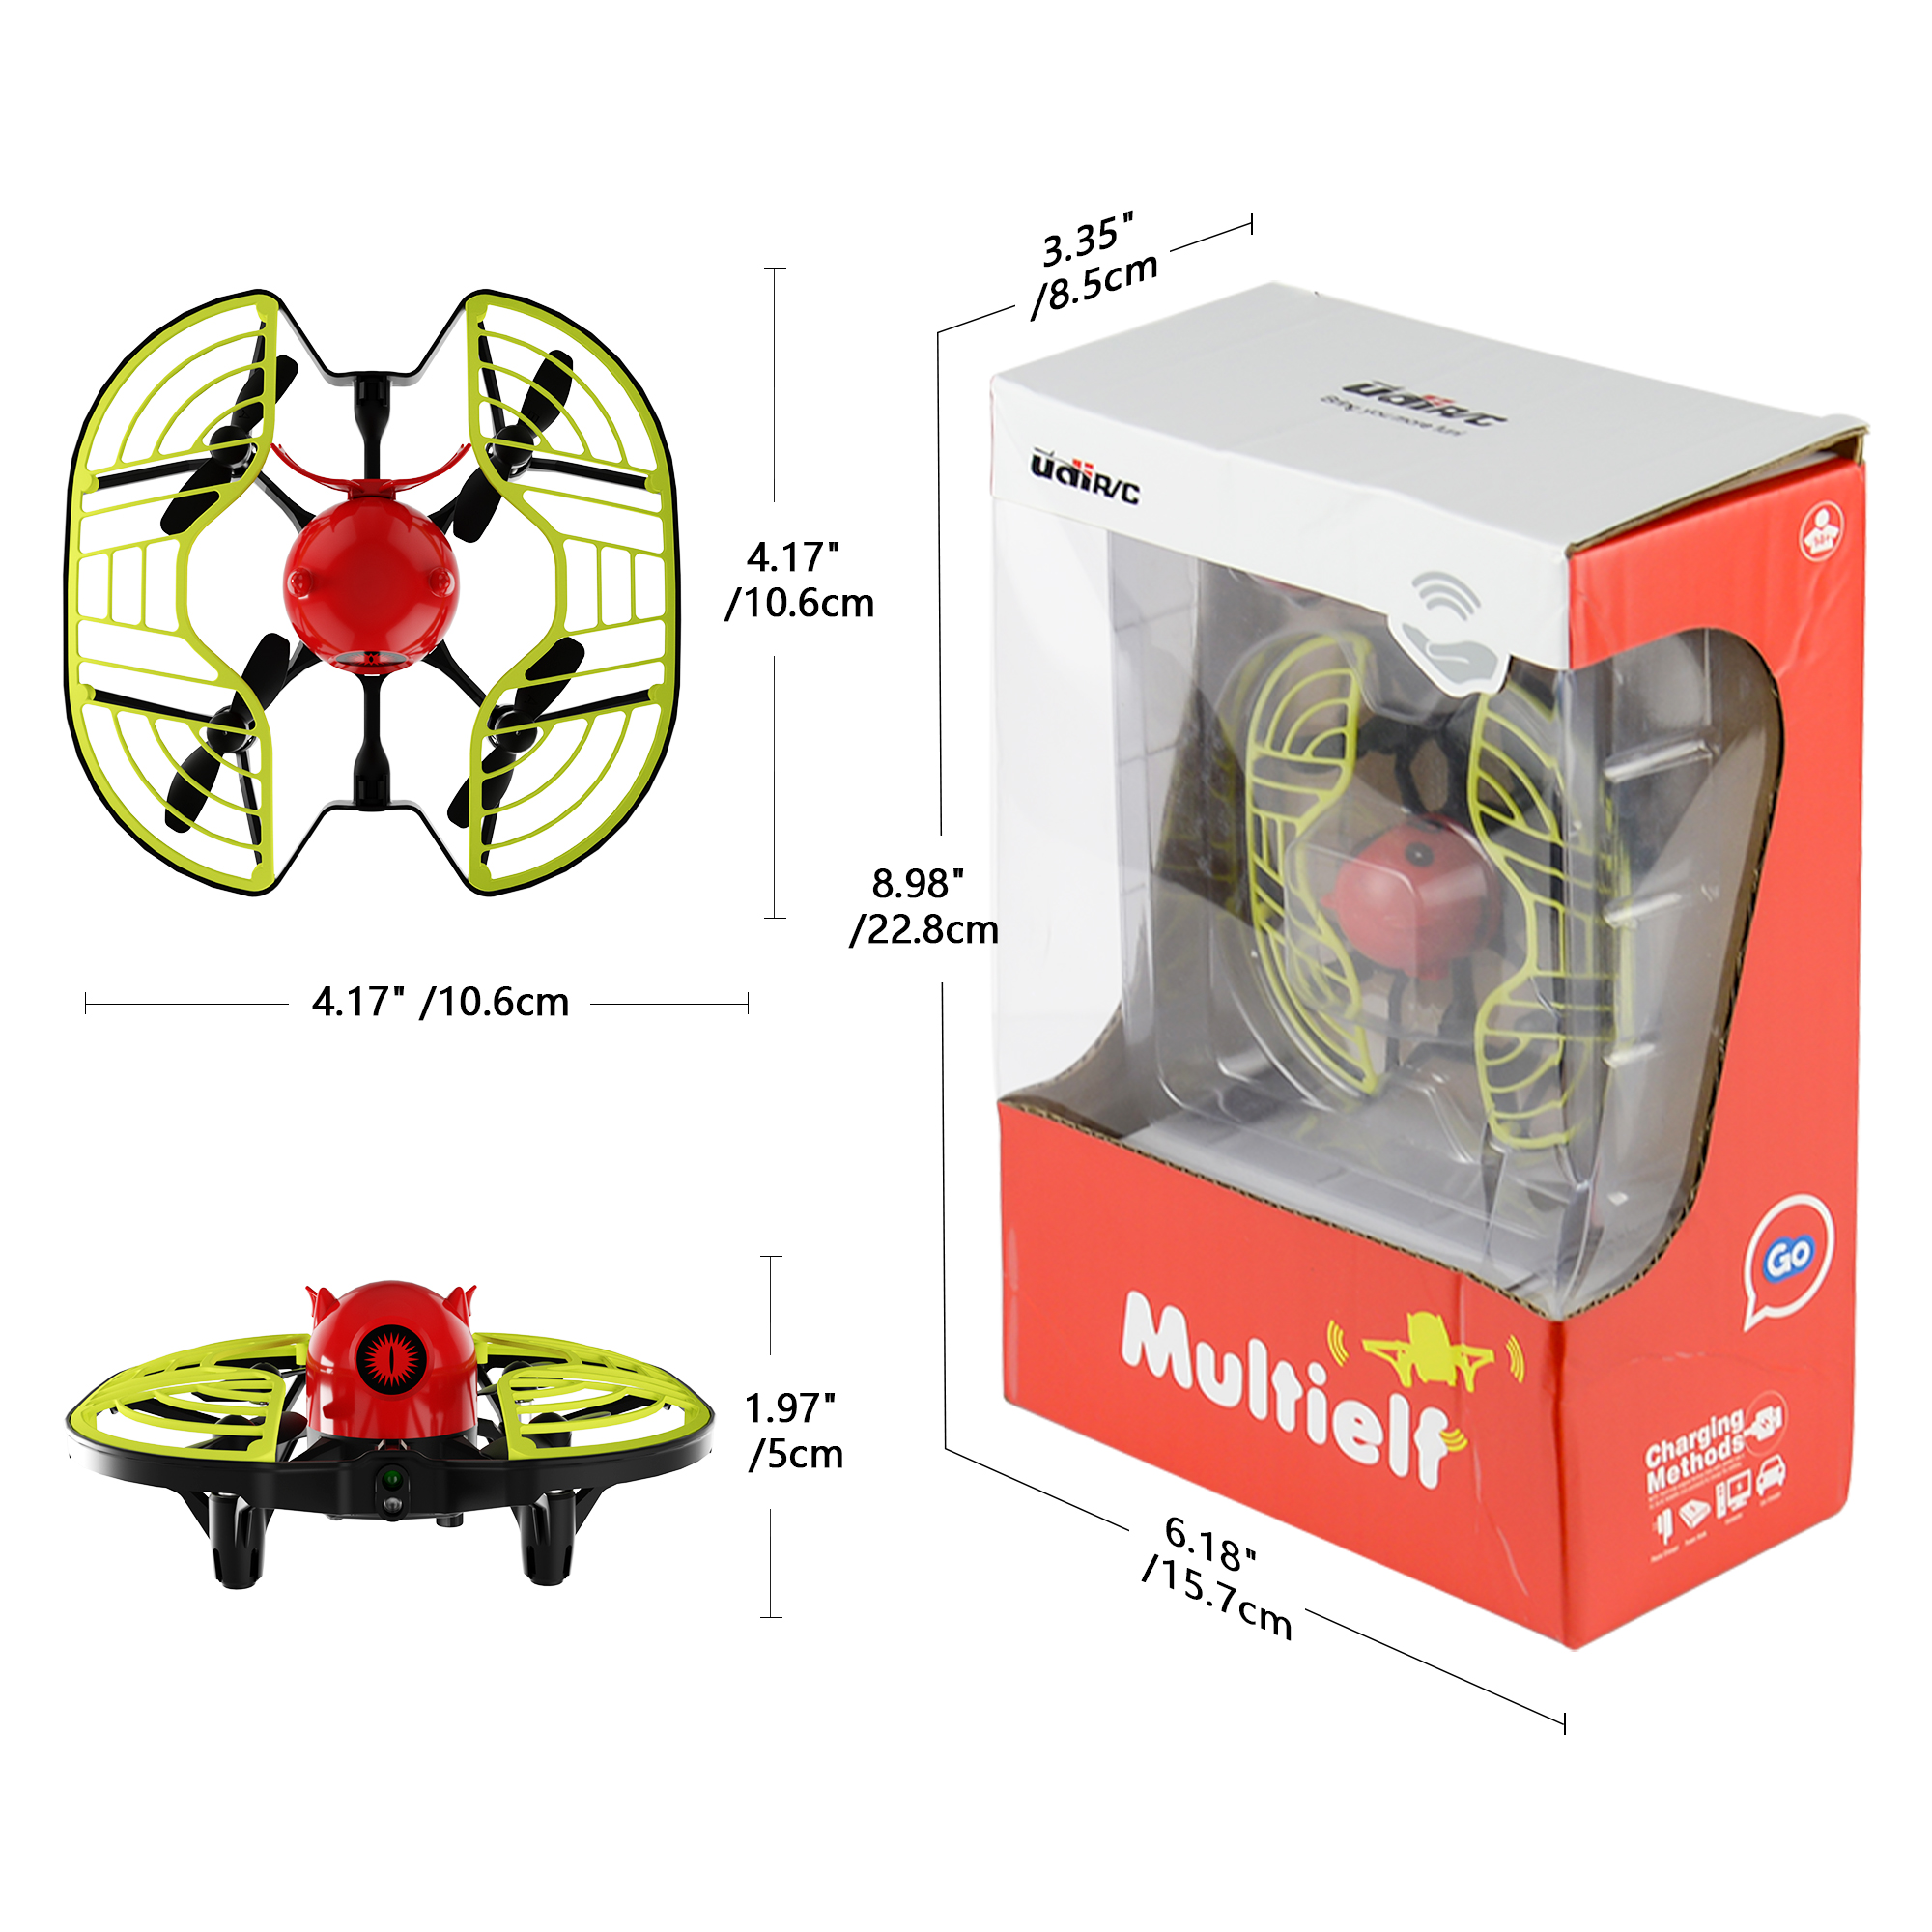 Beginner Mini RC Quadcopter with Auto Hovering